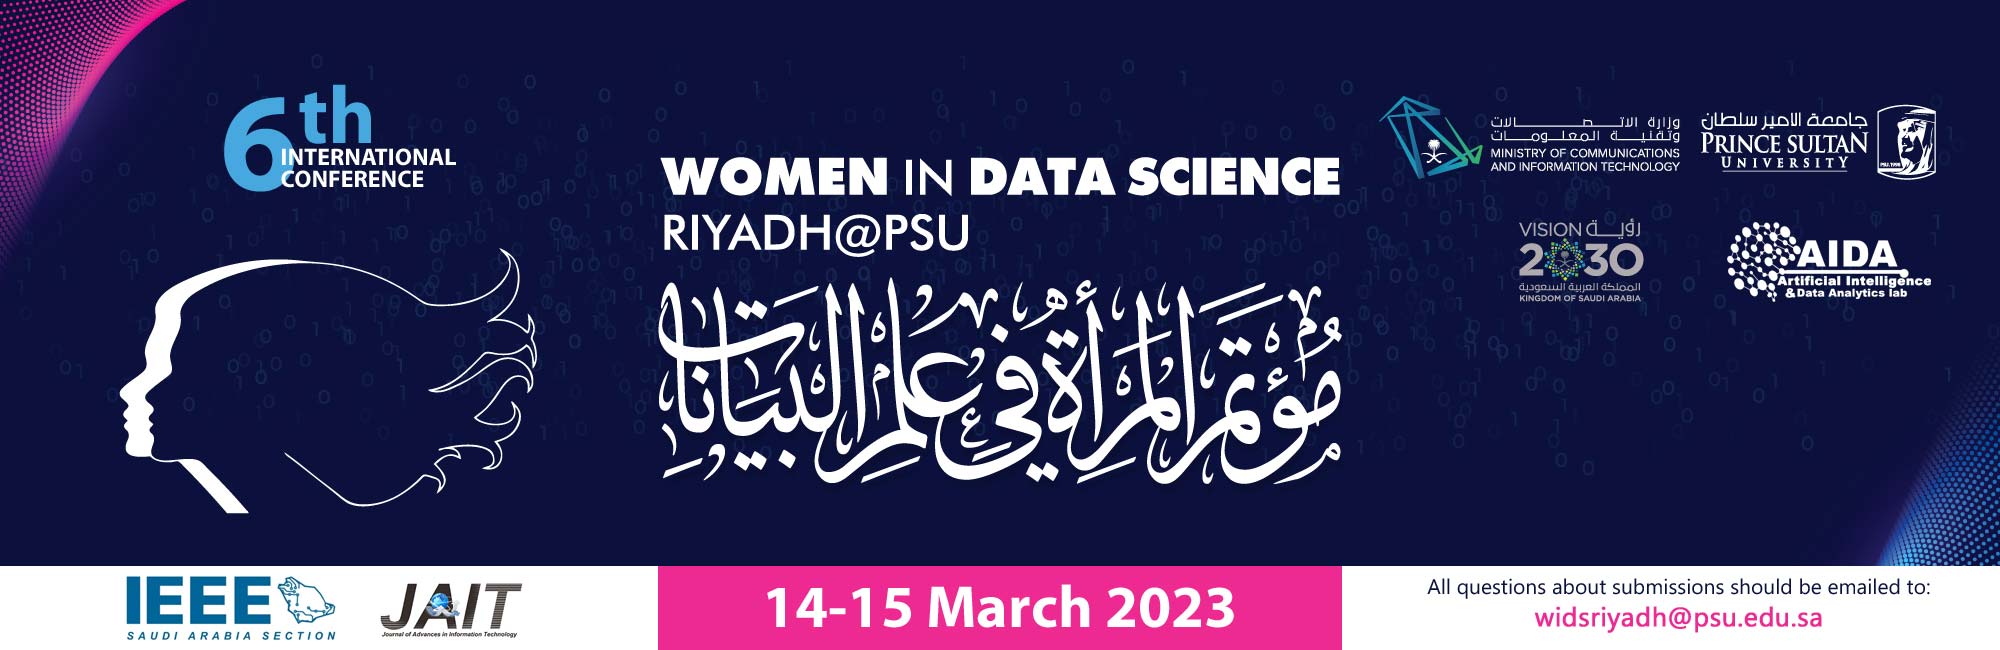 6th Women in Data Science International Conference